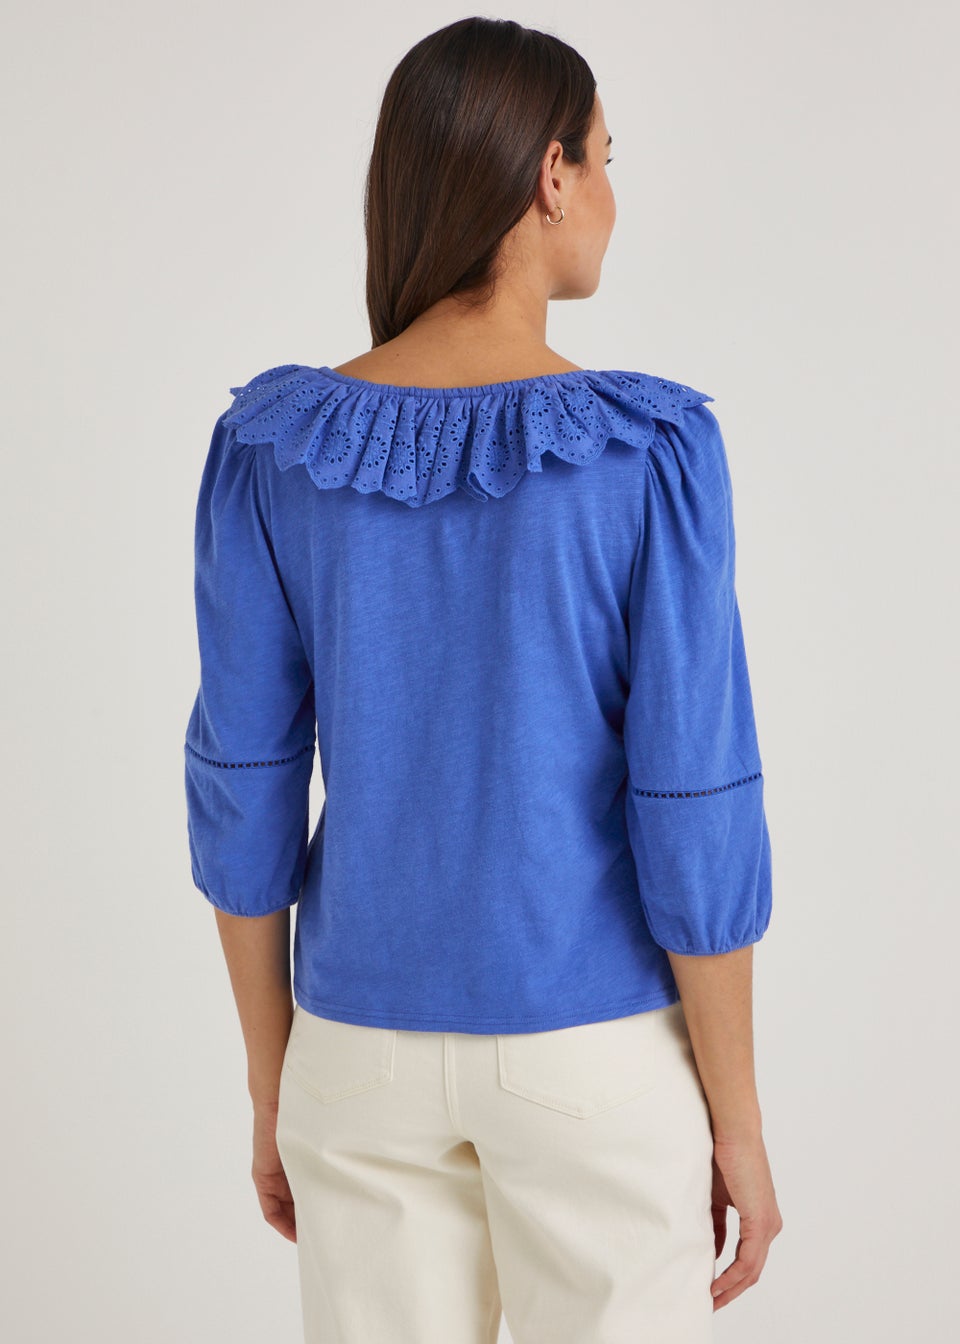 Blue Lace 3/4 Sleeve Top